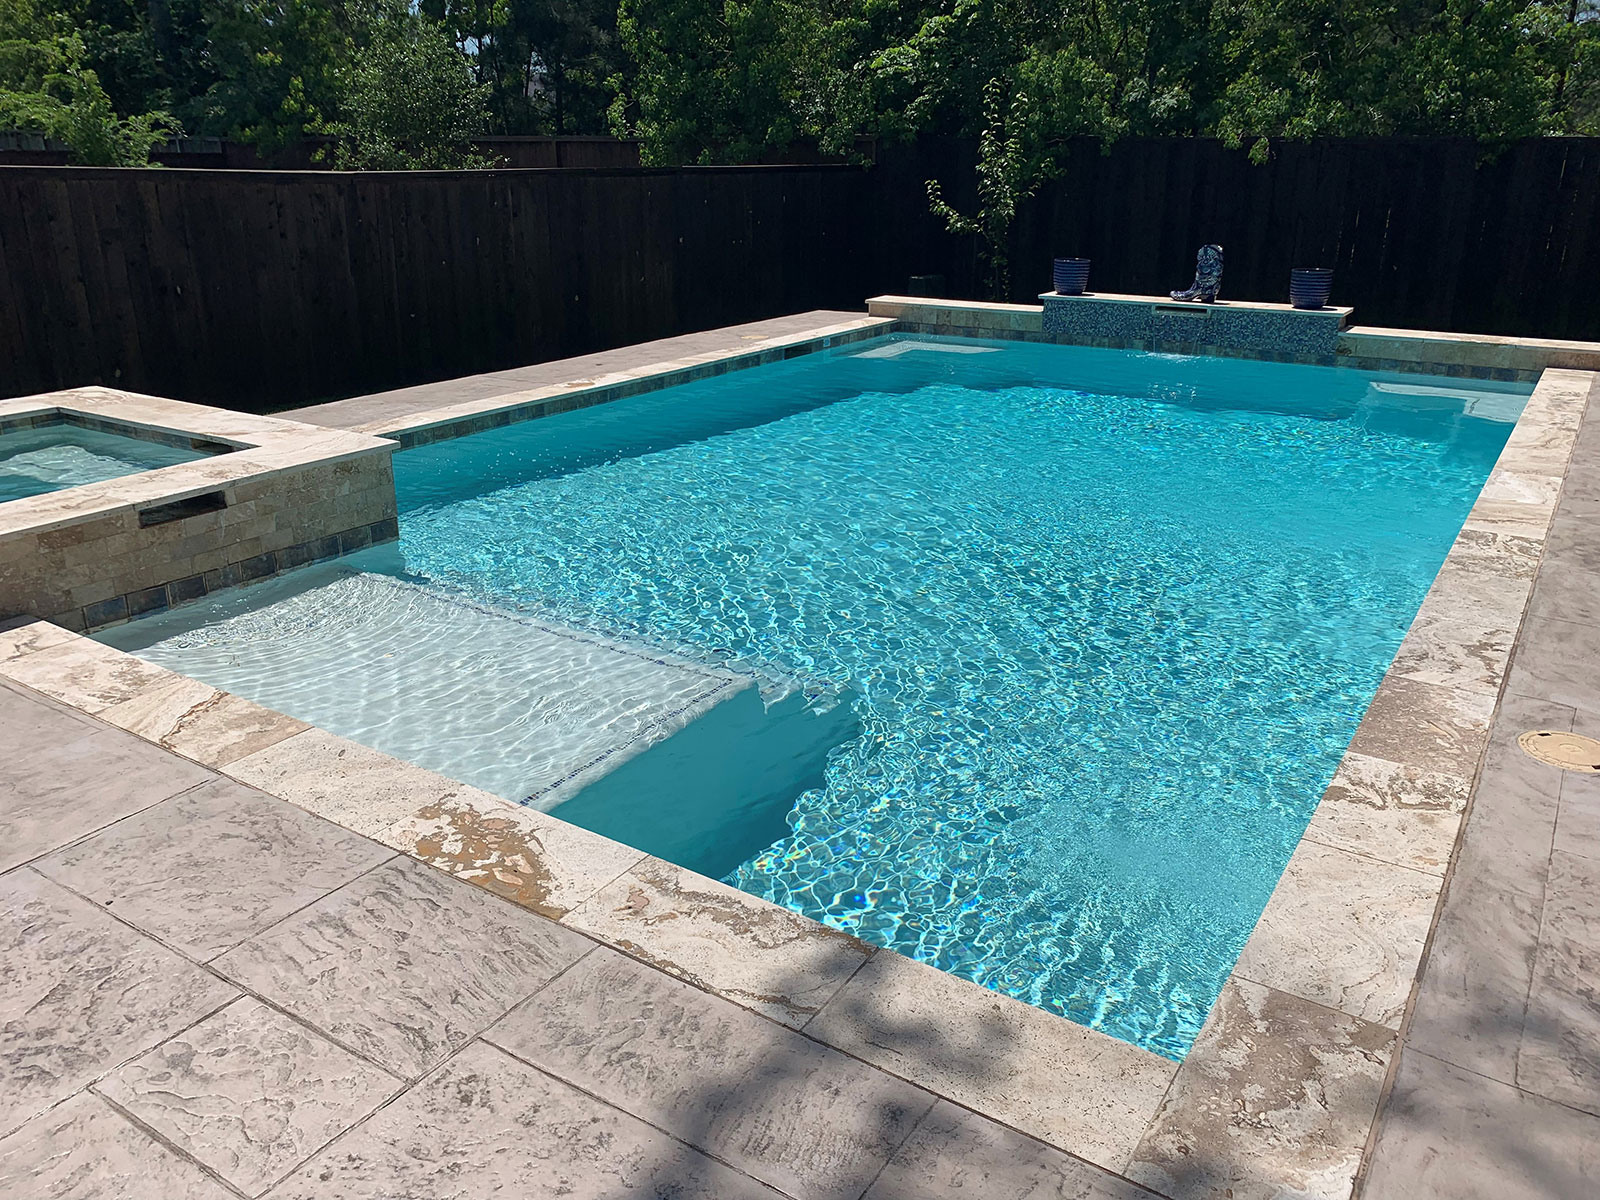 pool features, tile and coping